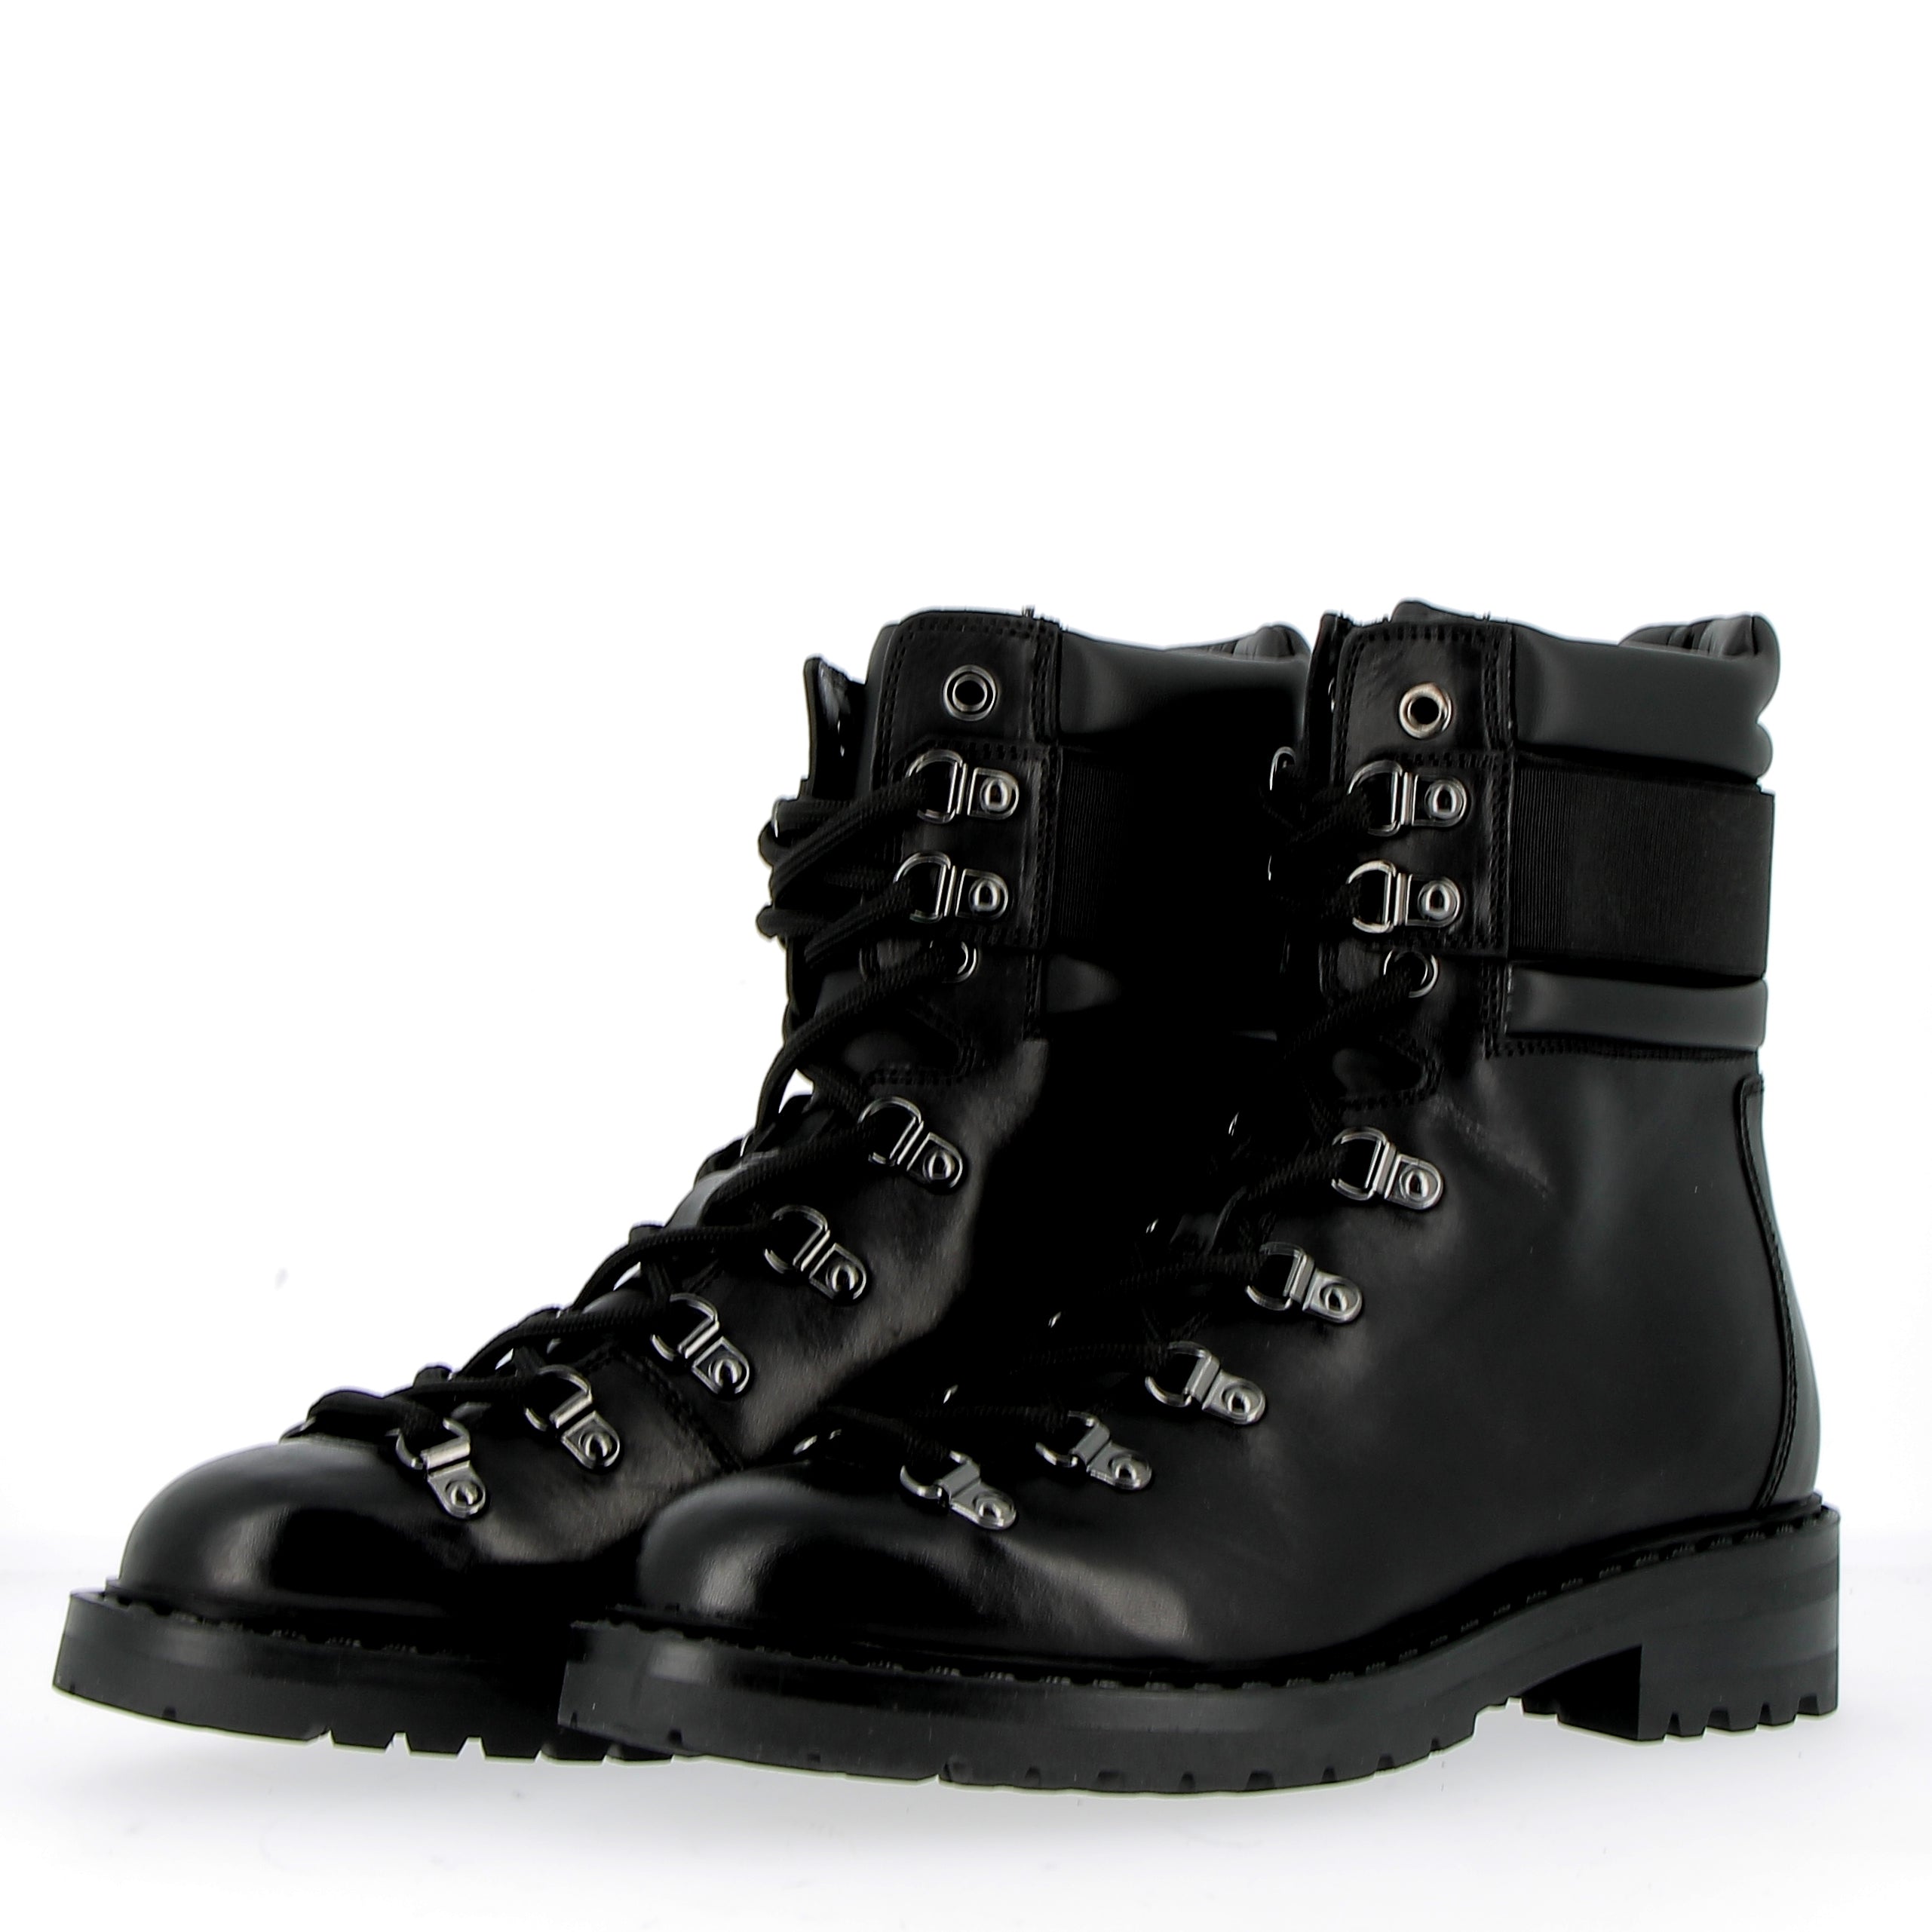 Rock boot in black leather